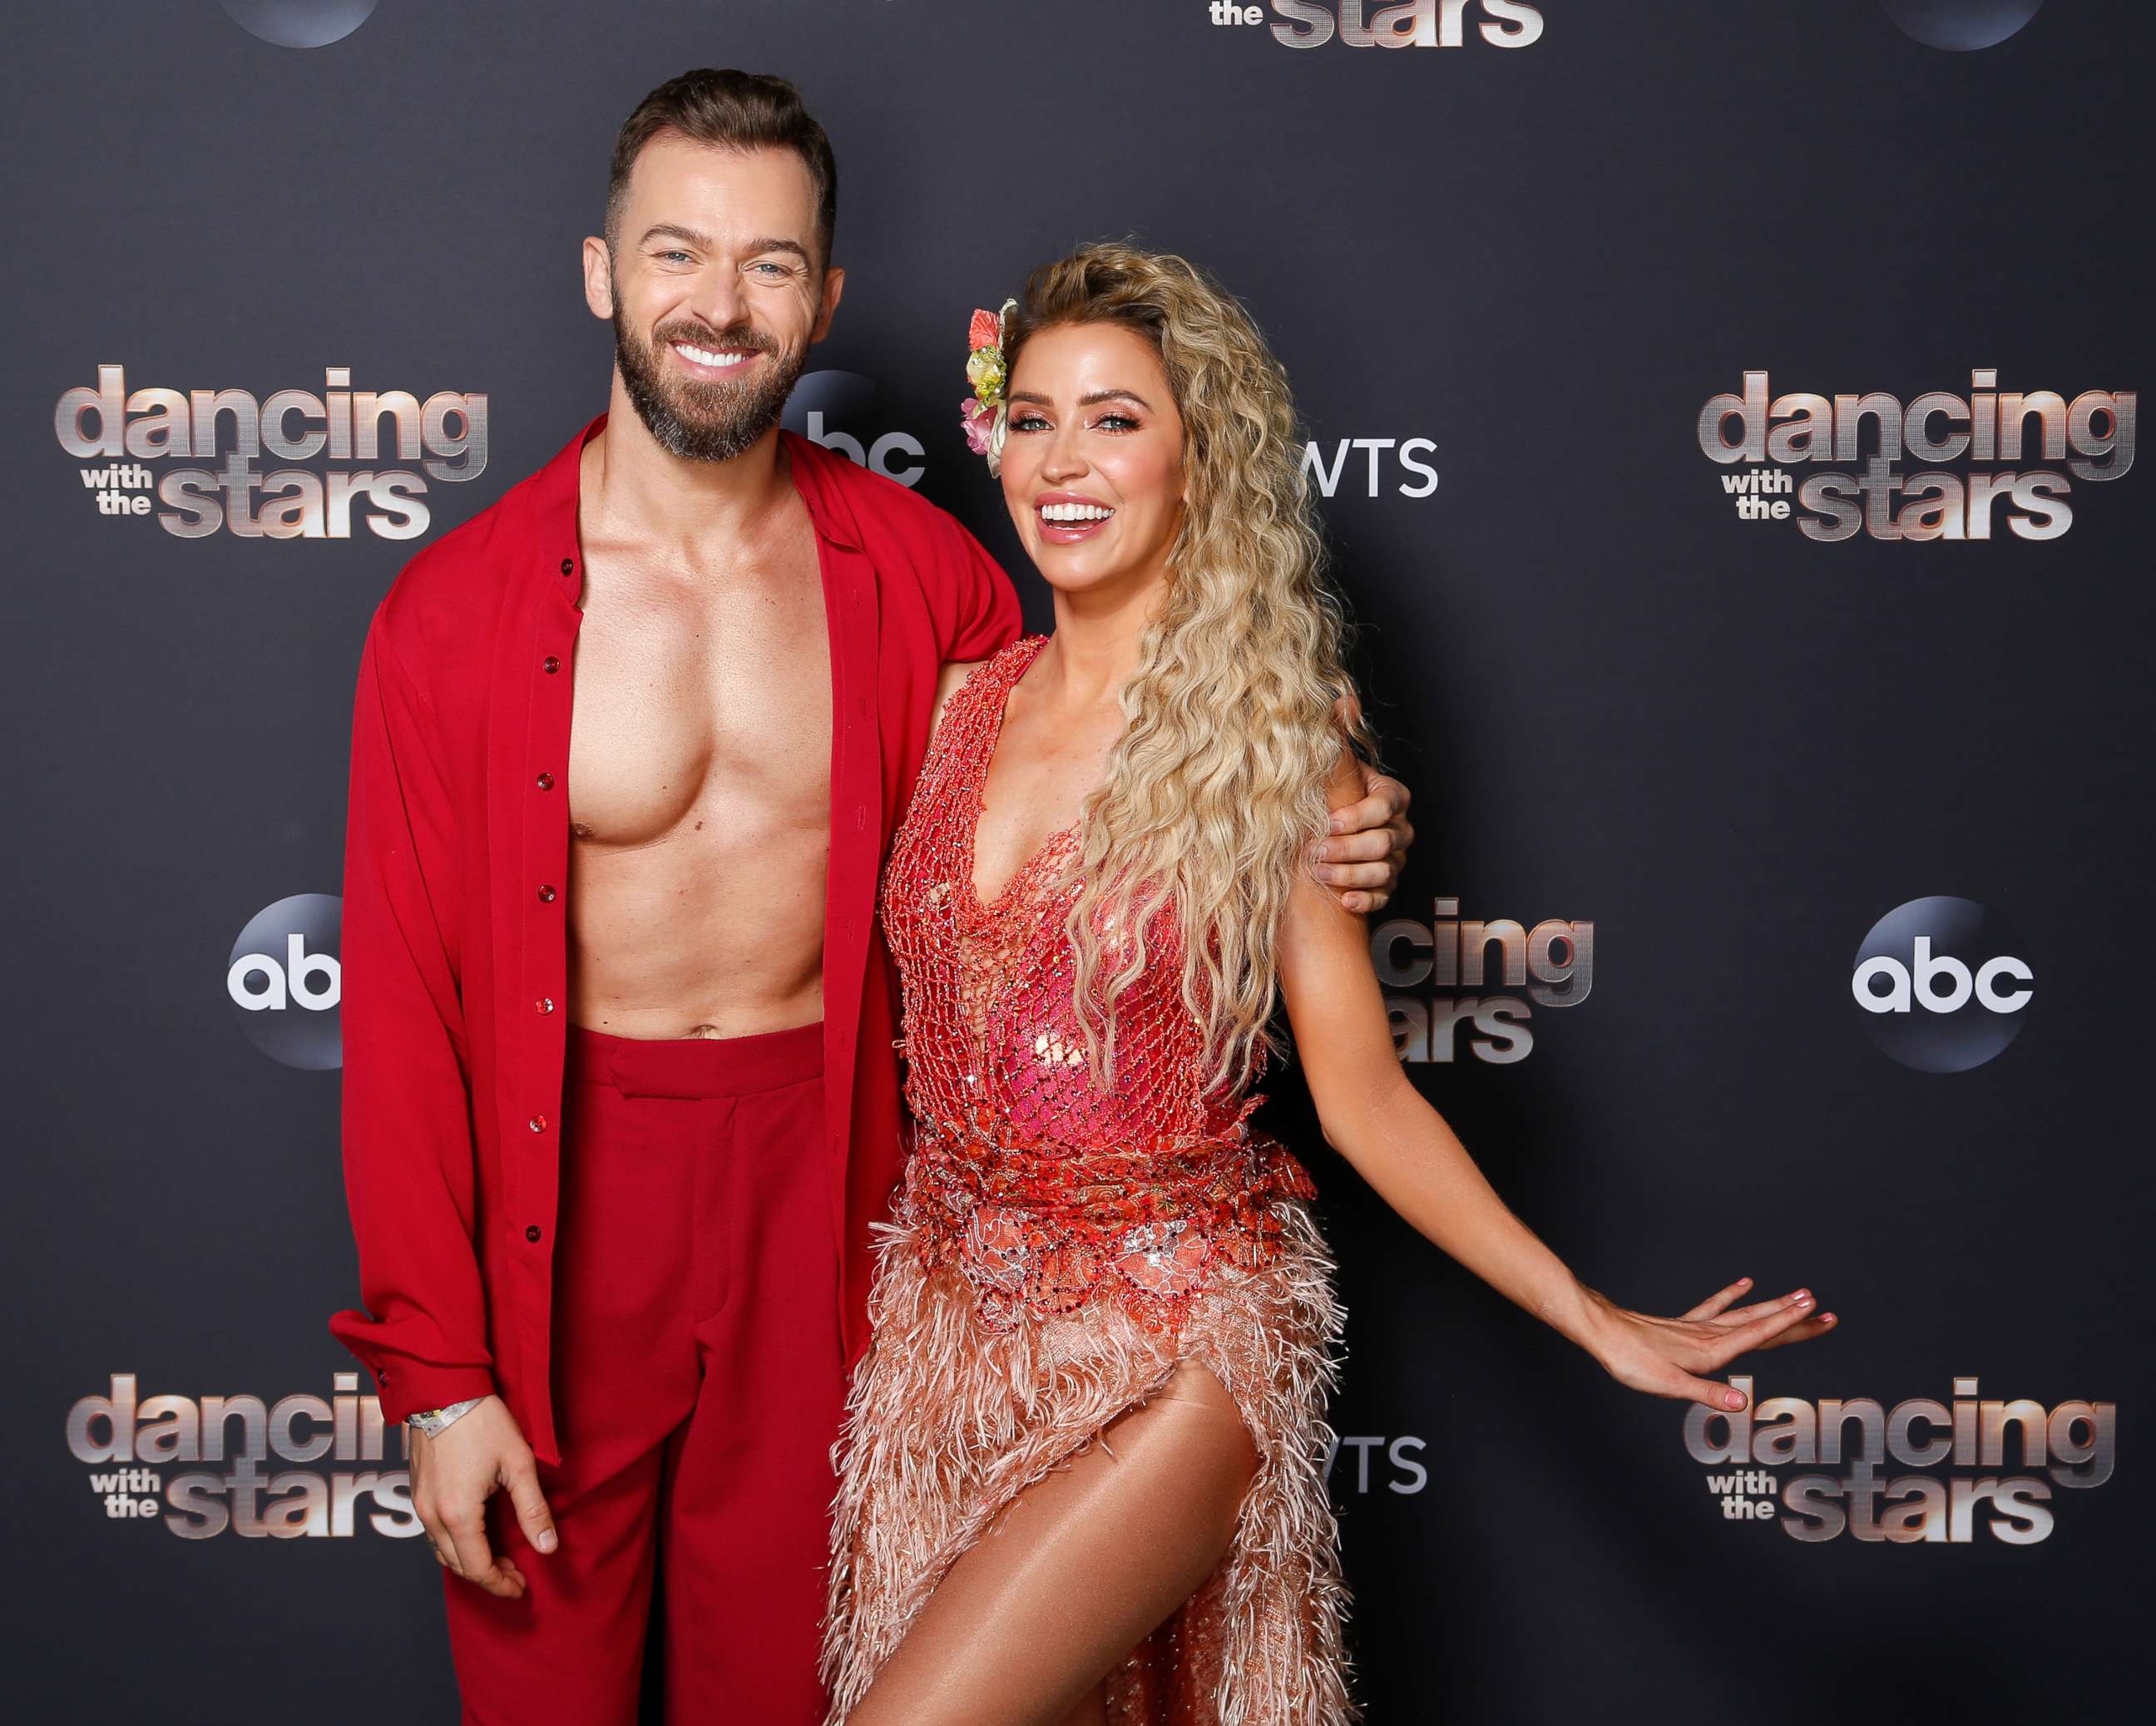 PHOTO: Artem Chigvintsev and Kaitlyn Bristowe on "Dancing With the Stars."